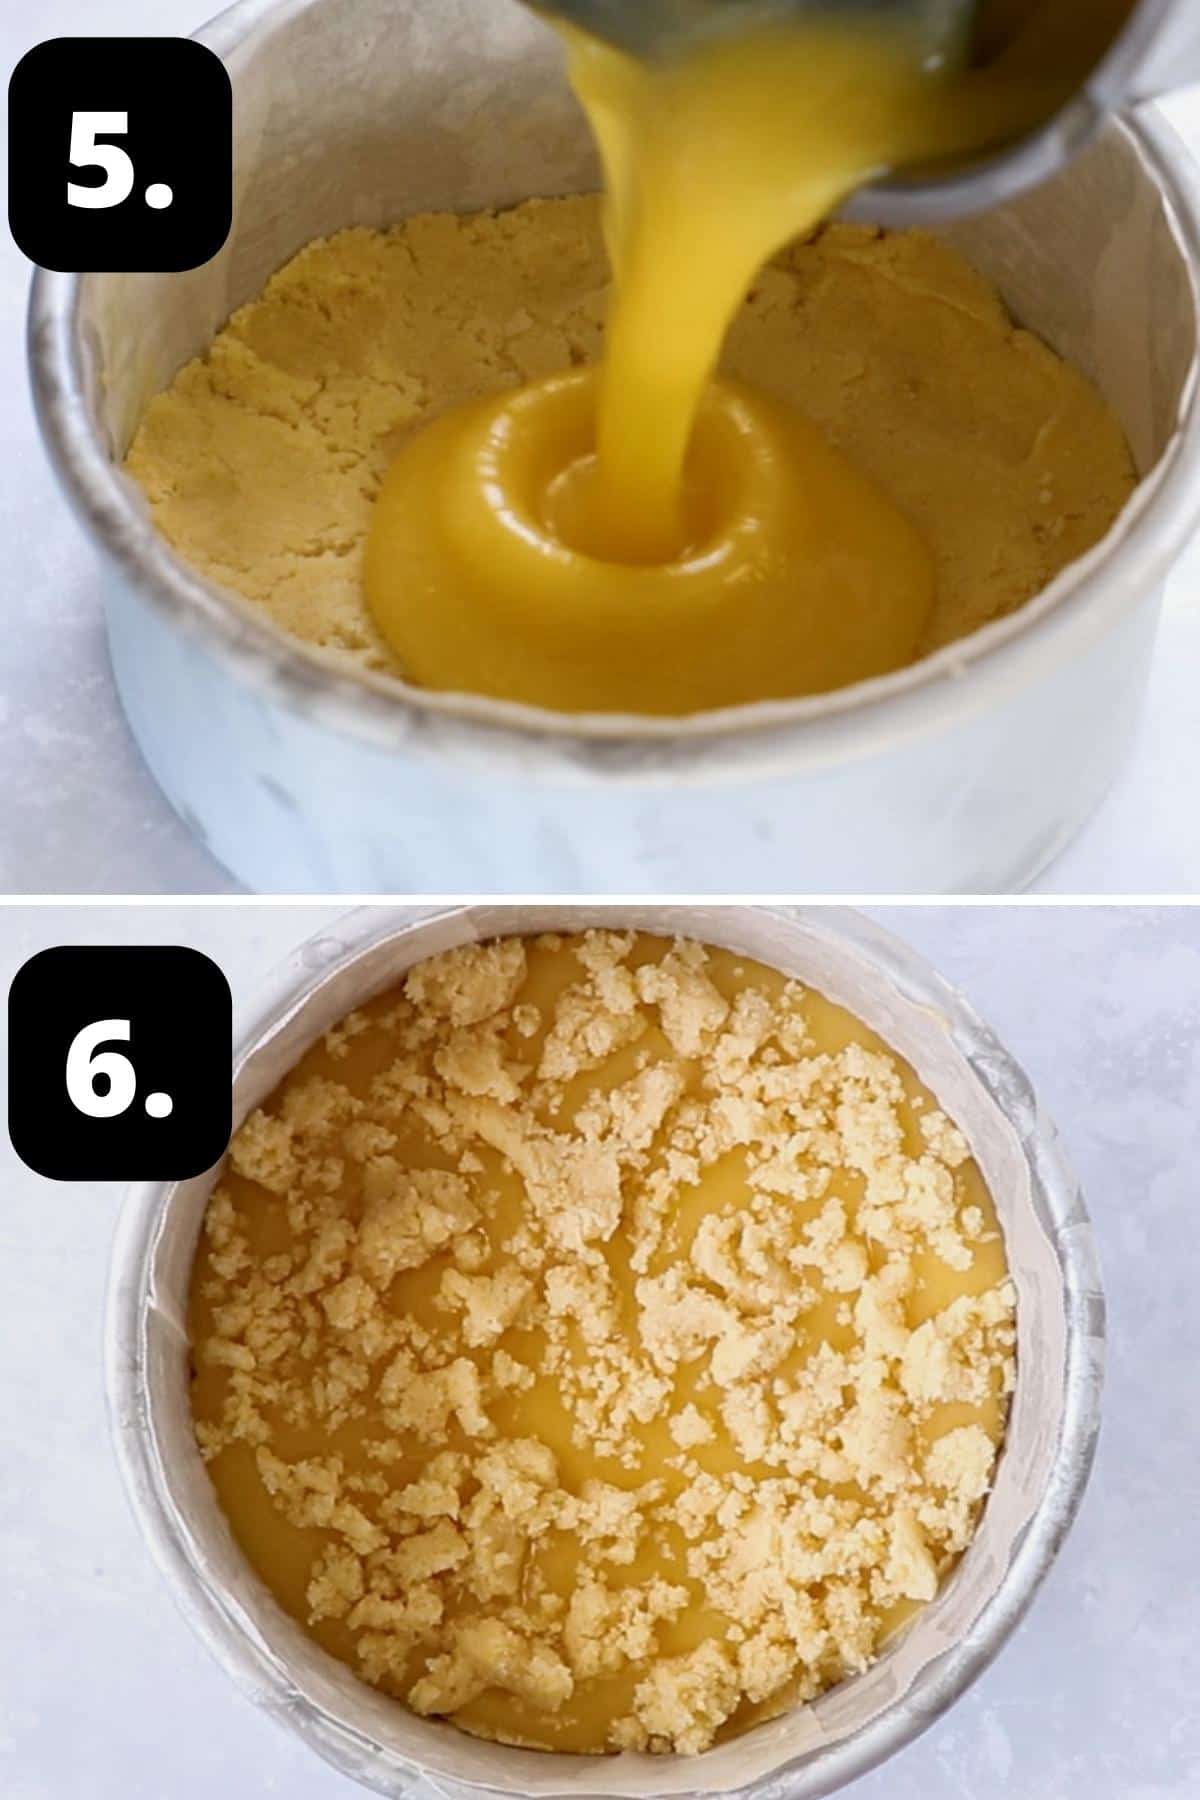 Steps 5-6 of preparing this recipe - pouring the curd onto the cake base and topping with the remaining cake mixture.